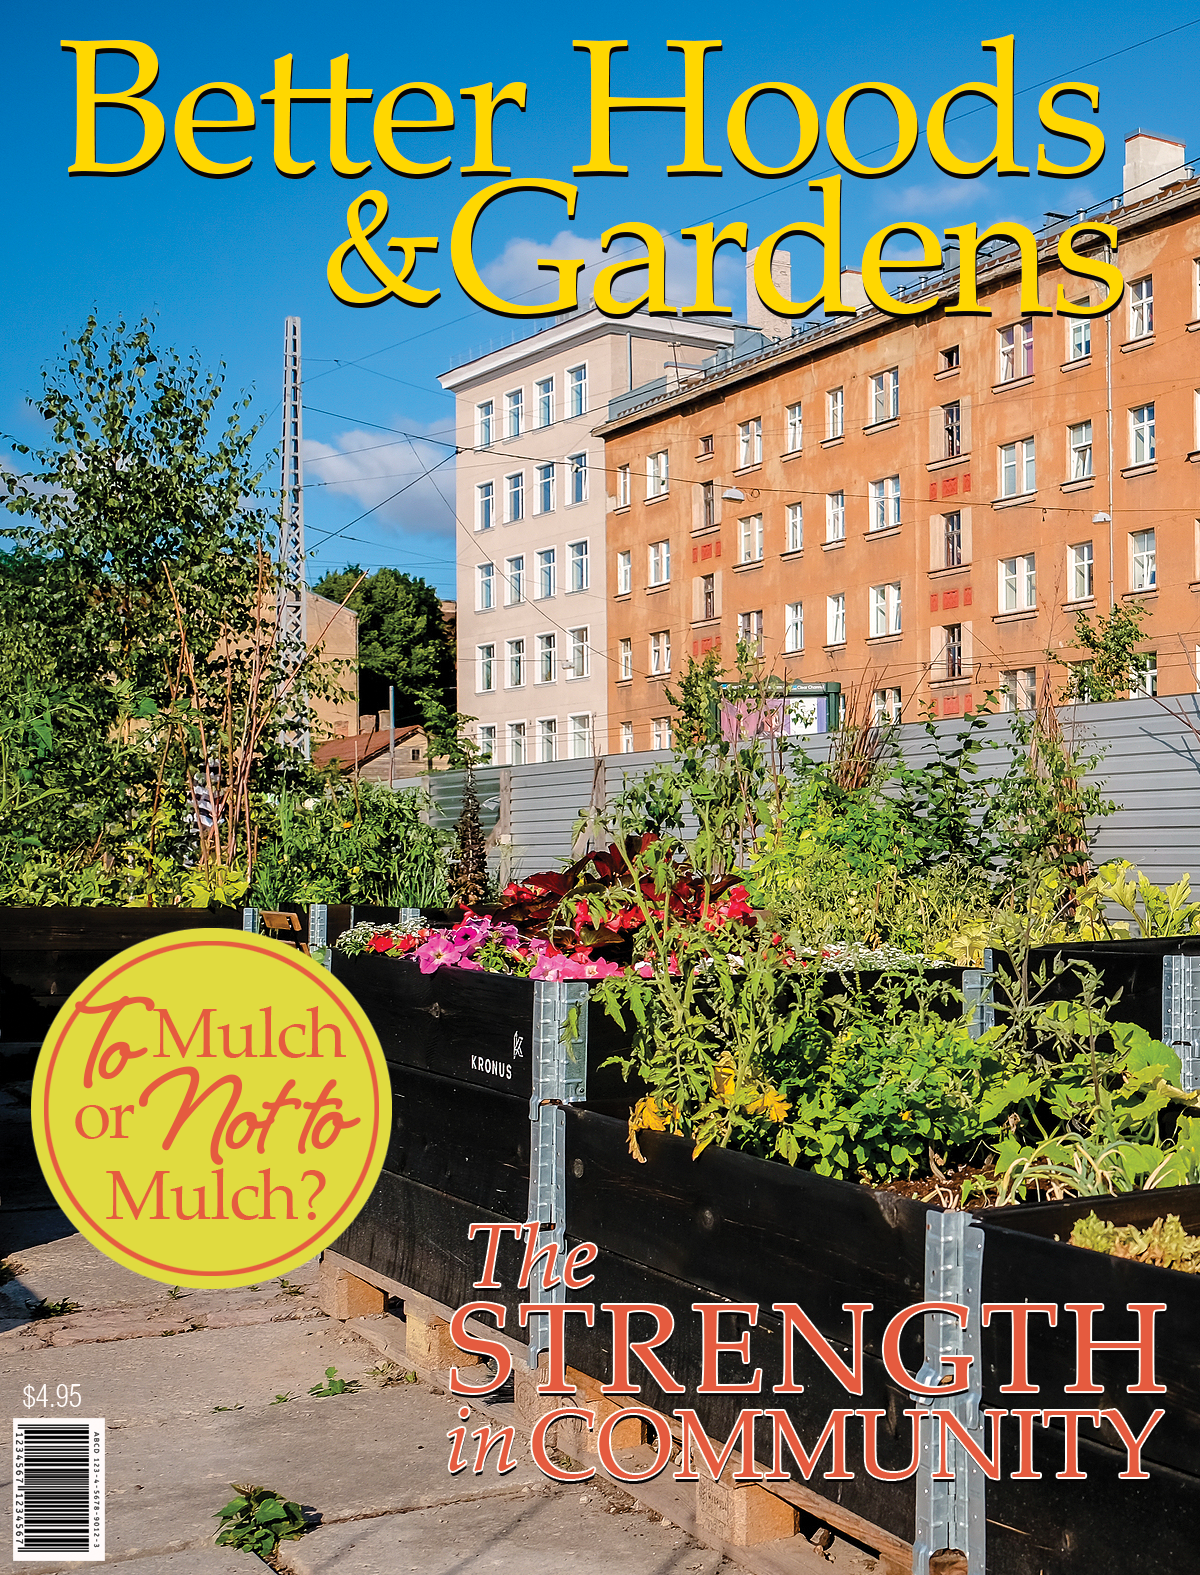 AE S2_FRONT PAGE_Better Hoods & Gardens_10.4